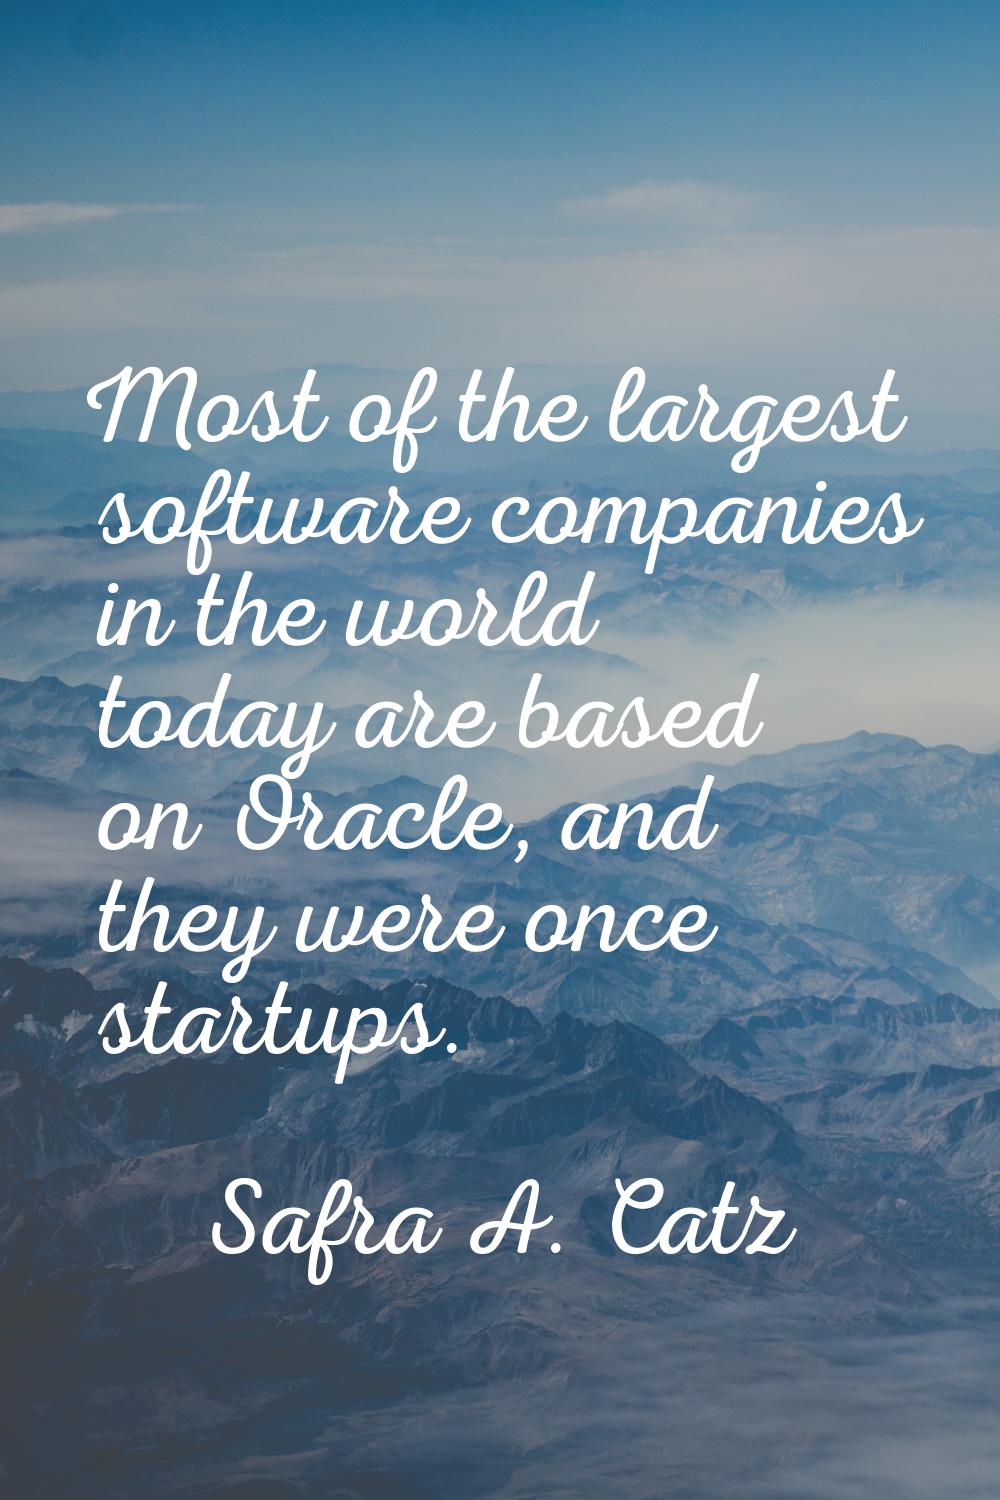 Most of the largest software companies in the world today are based on Oracle, and they were once s